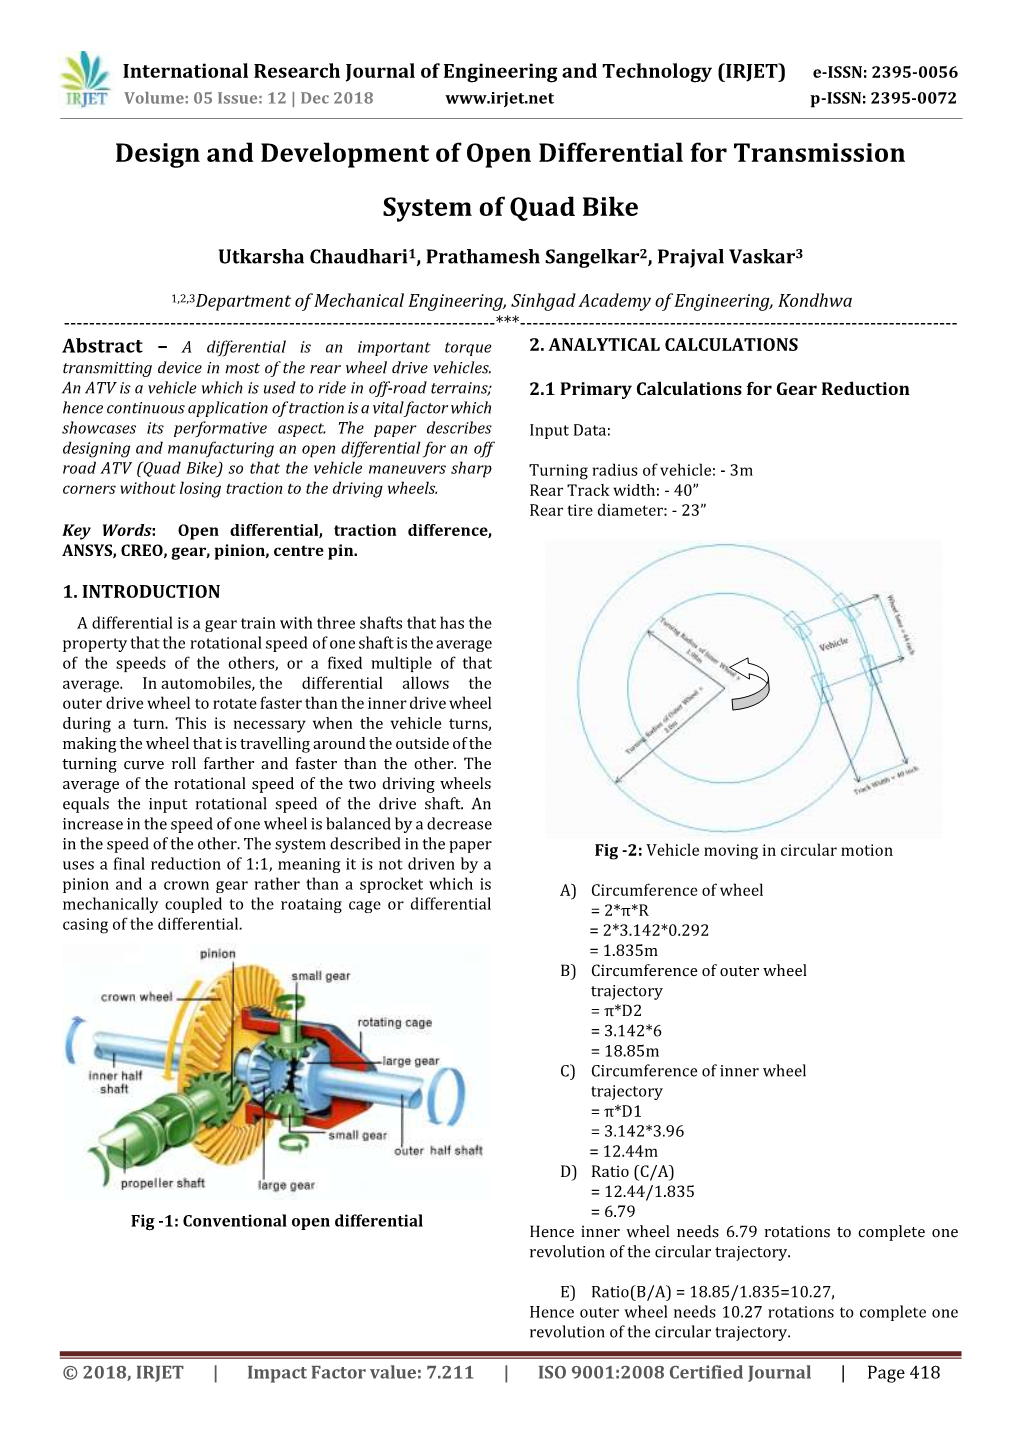 Design and Development of Open Differential for Transmission System of Quad Bike